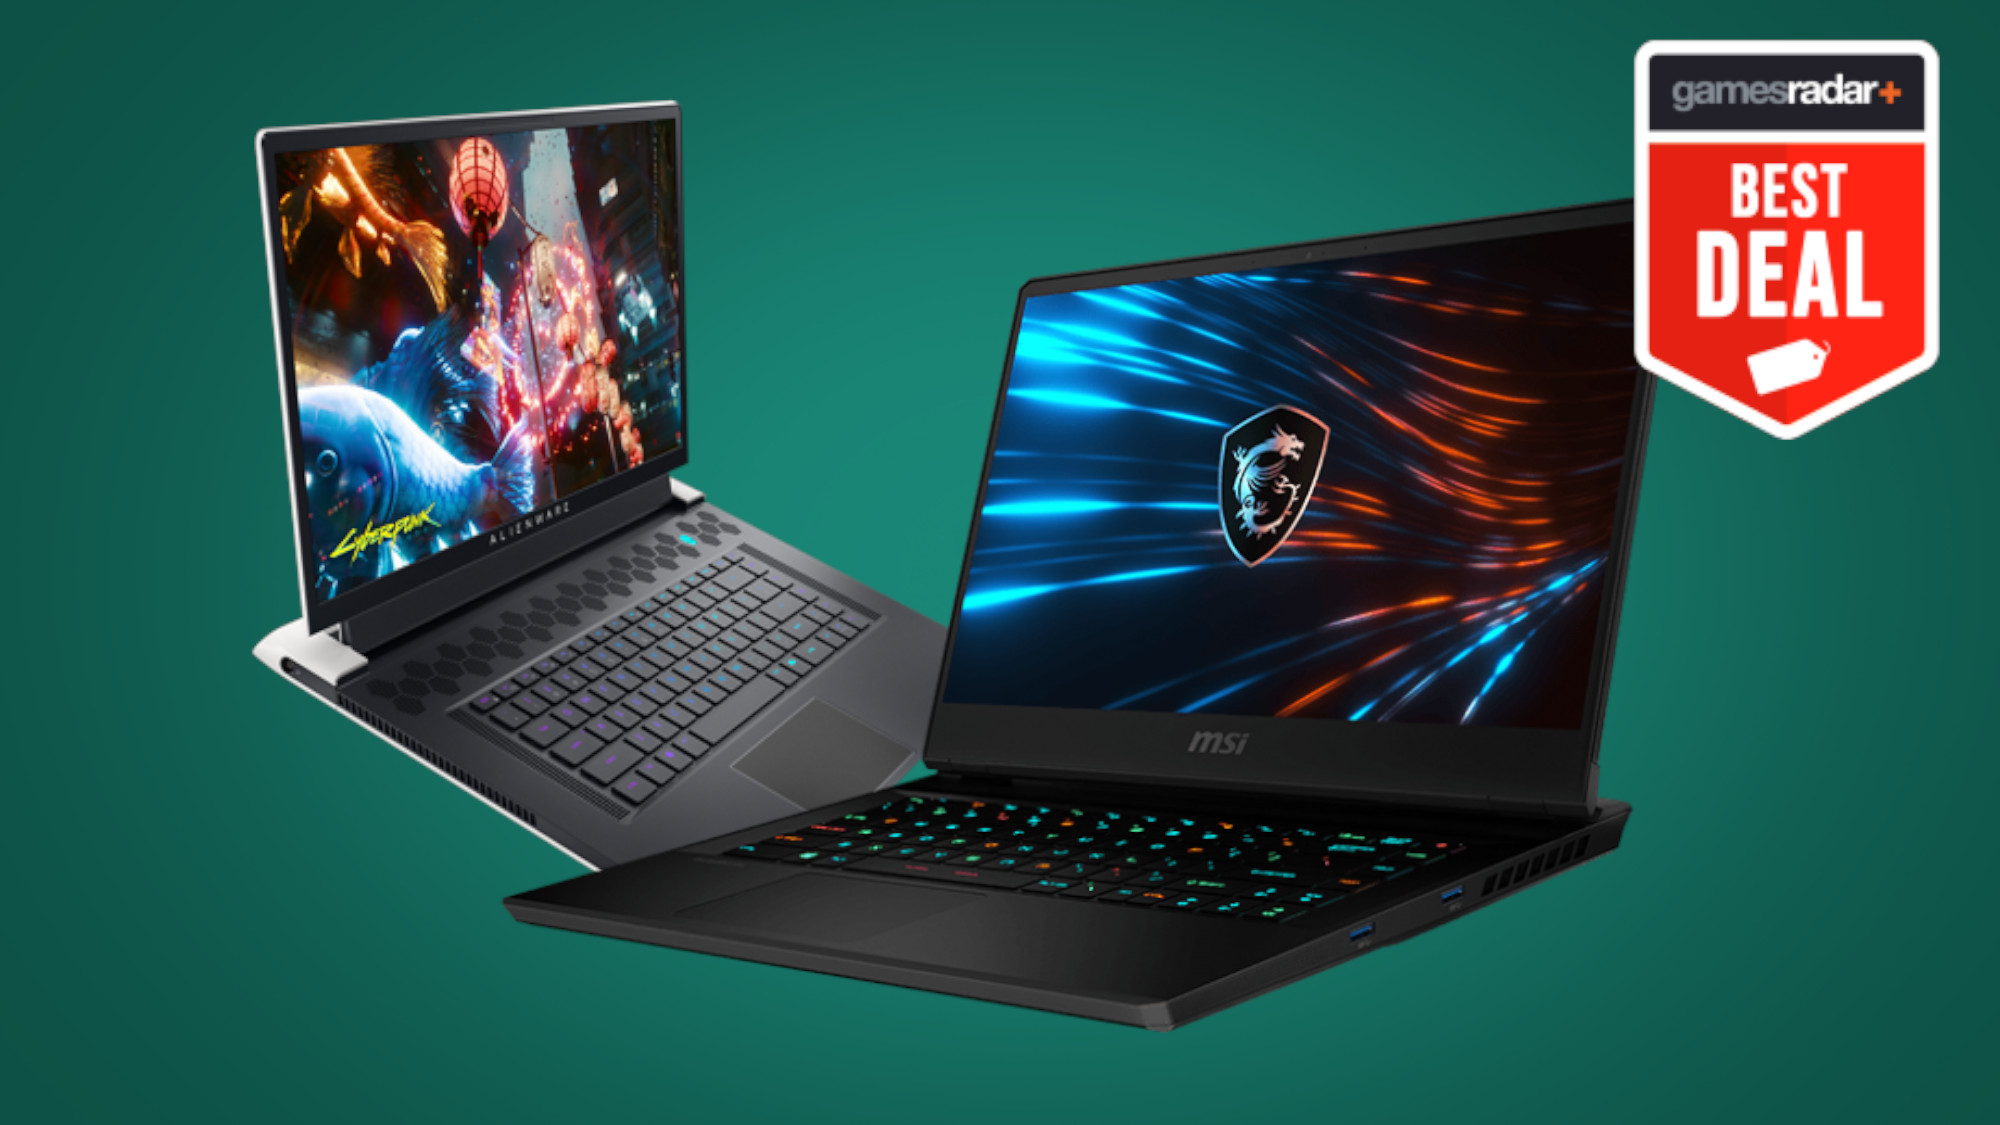 The best RTX 3080 laptop deals in April 2022: experience the bleeding edge of gaming for less